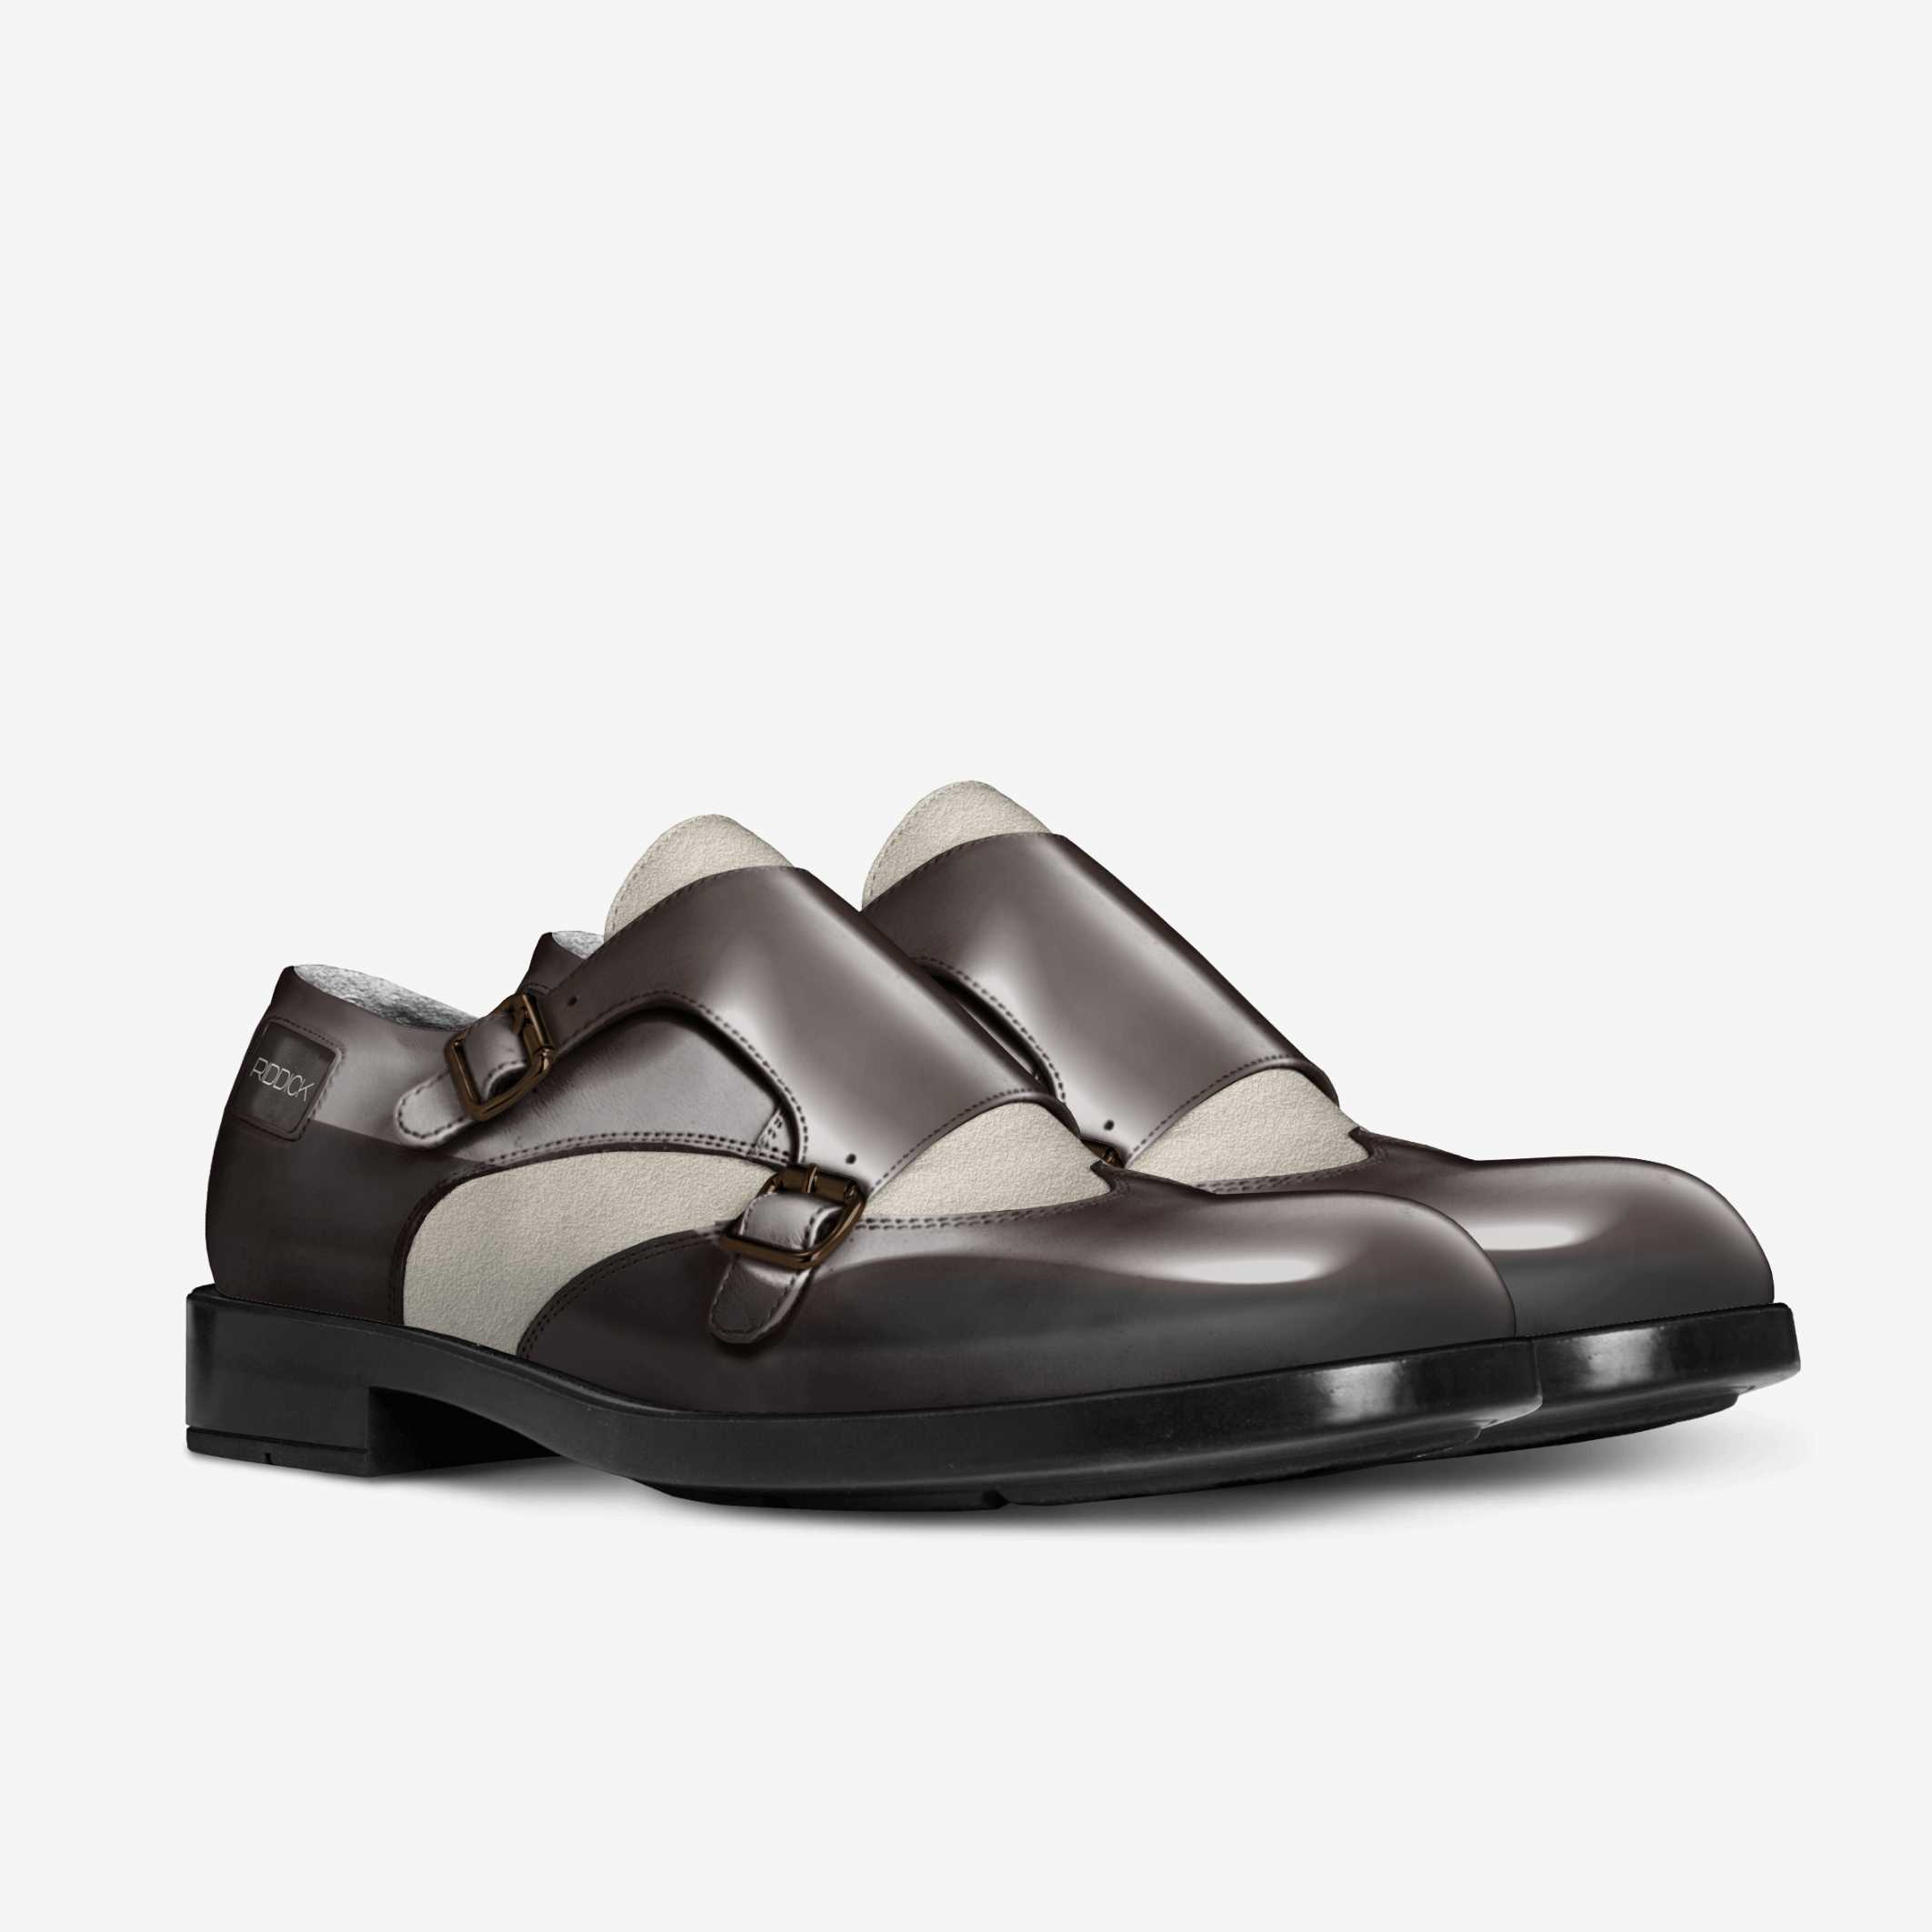 EXEC, STRAPPED (TOBACCO AND PUDDY) - Riddick Shoes Shoe Riddick Shoes   